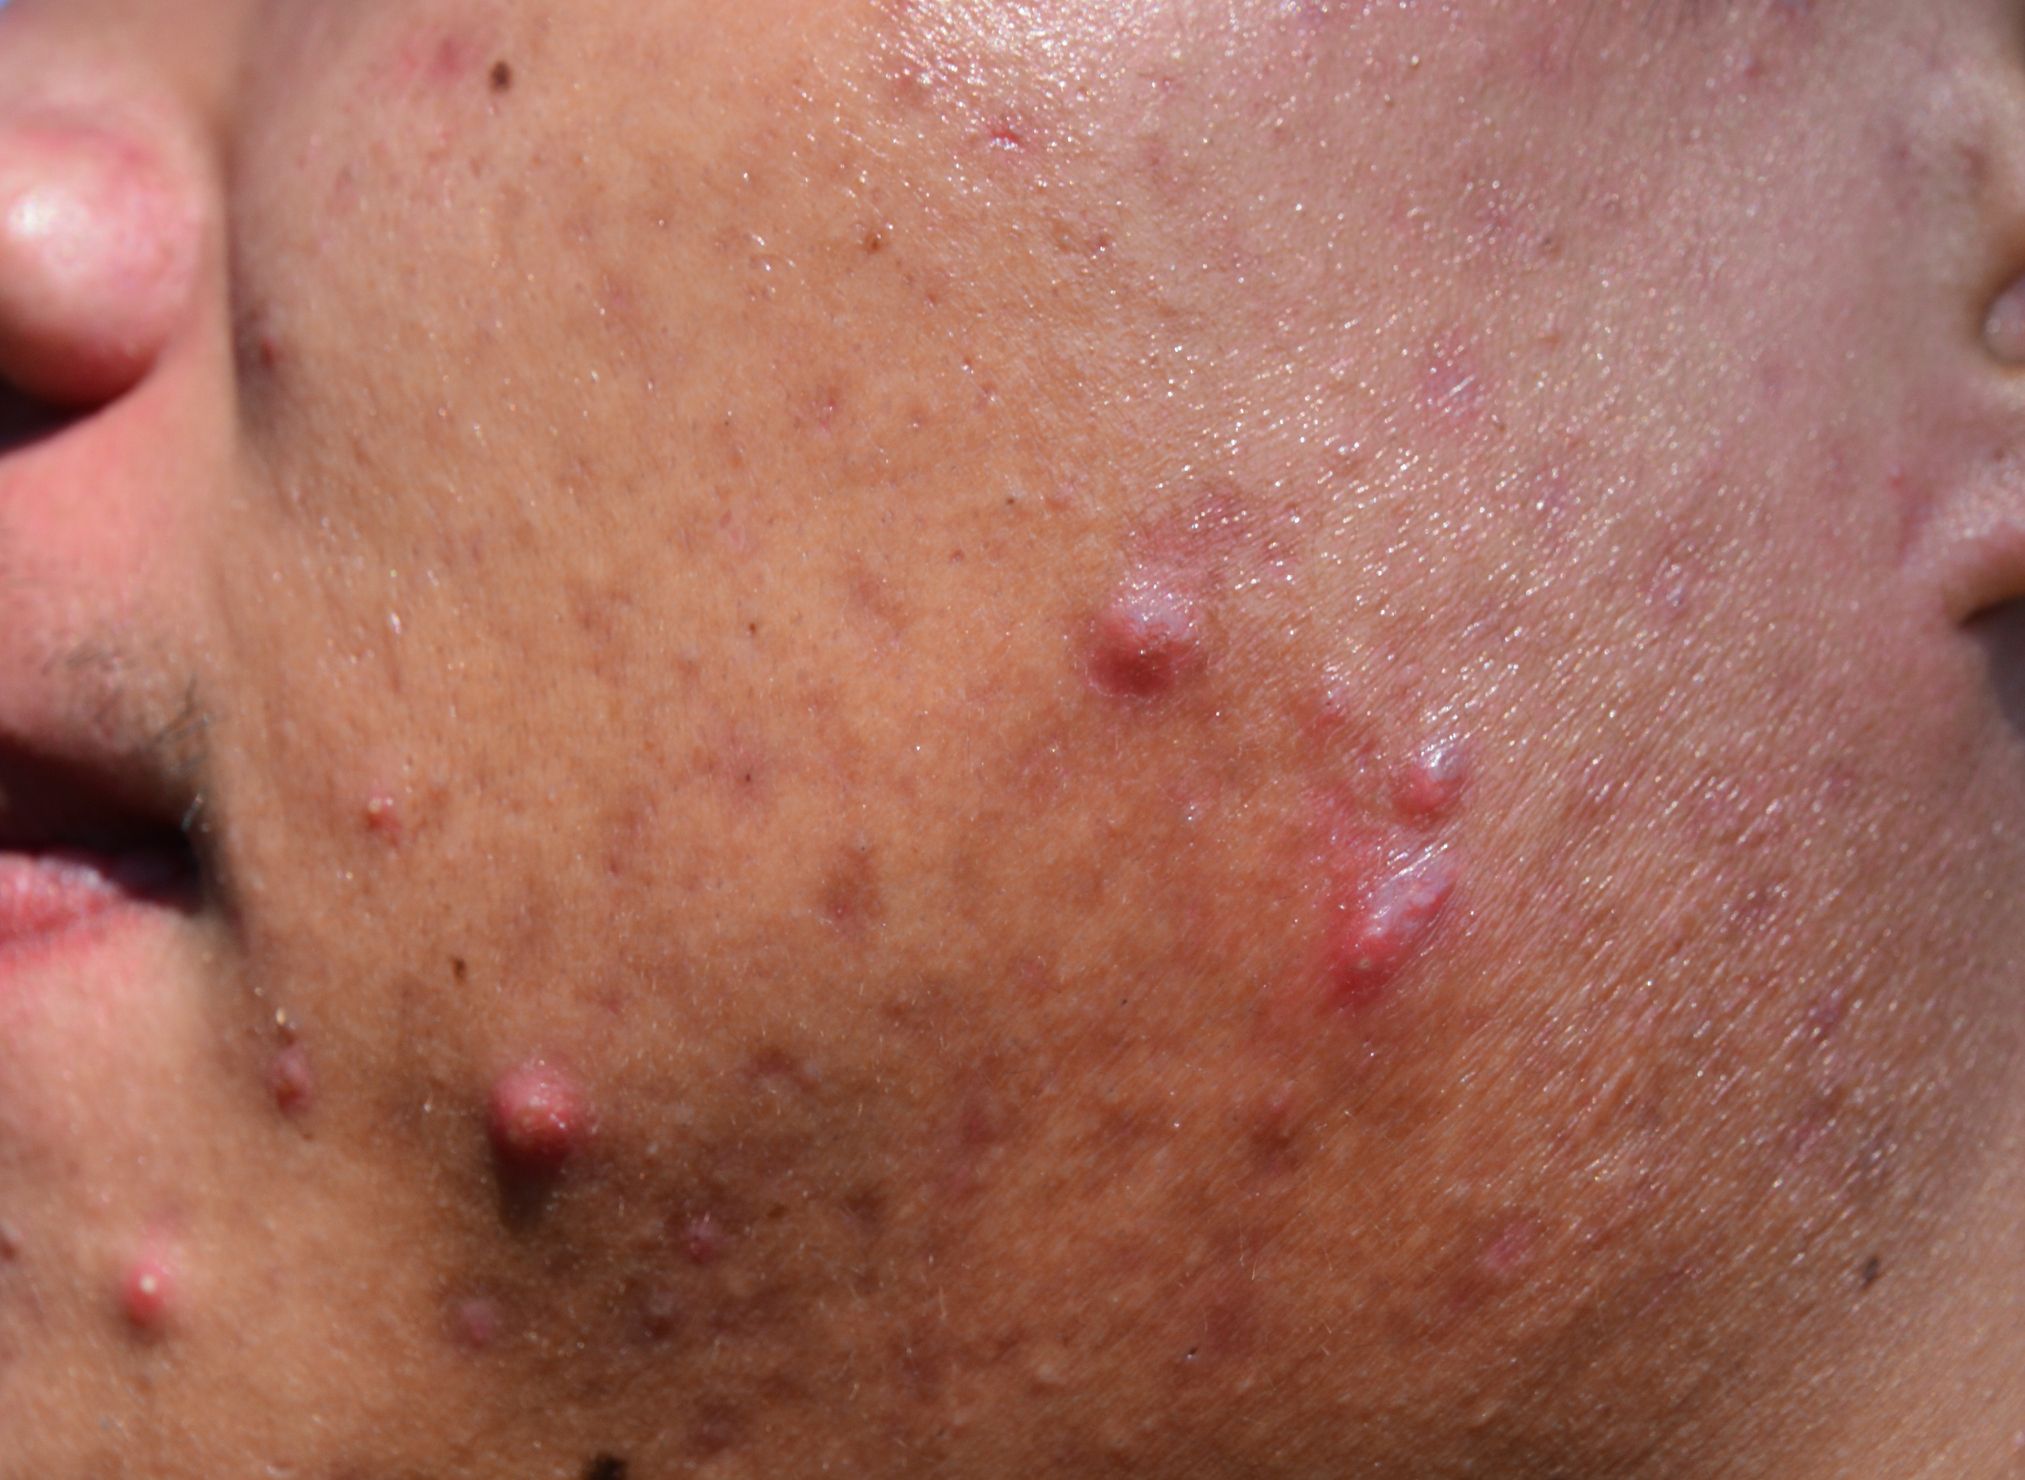 acne on skin face